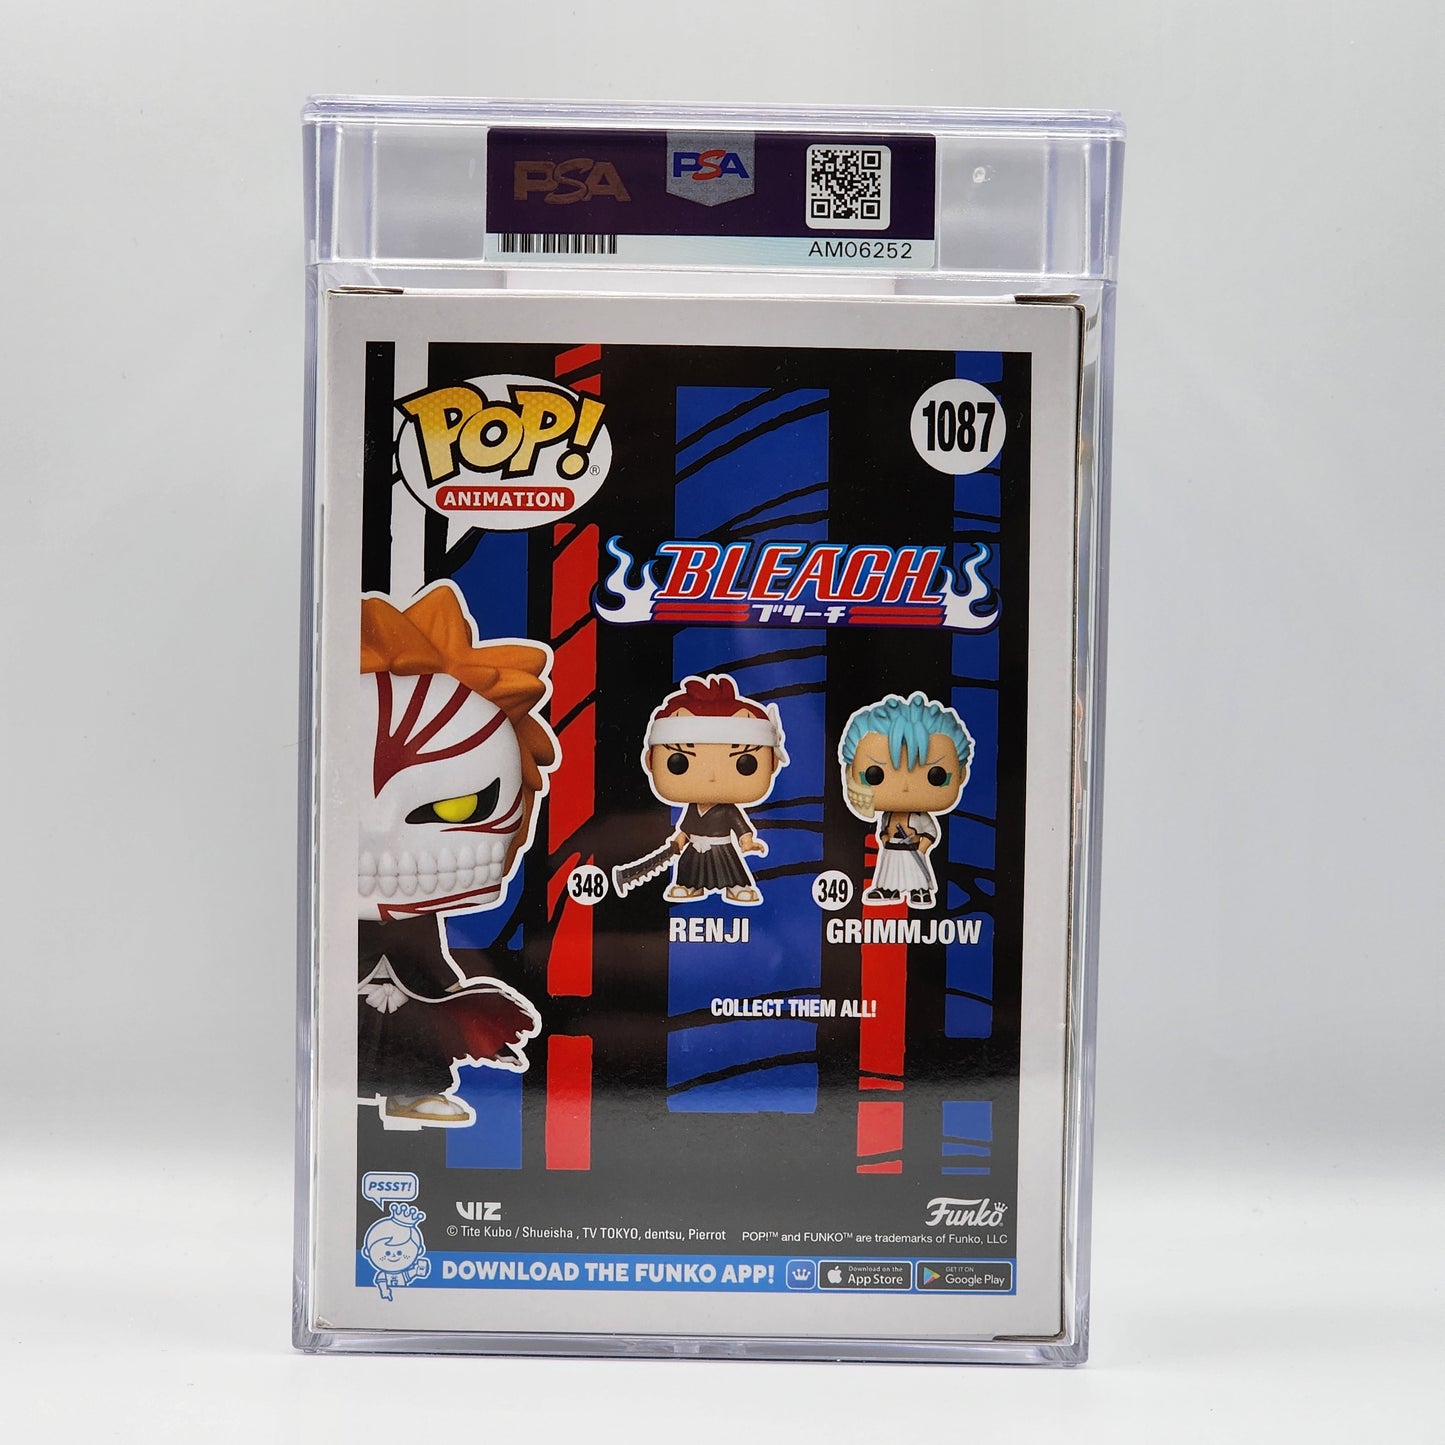 PSA ENCAPSULATED & SIGNATURE CERTIFIED - Funko POP! -BLEACH - ICHIGO (SIGNED BY JOHNNY YONG BOSCH) - AAA ANIME EXCLUSIVE - CHASE